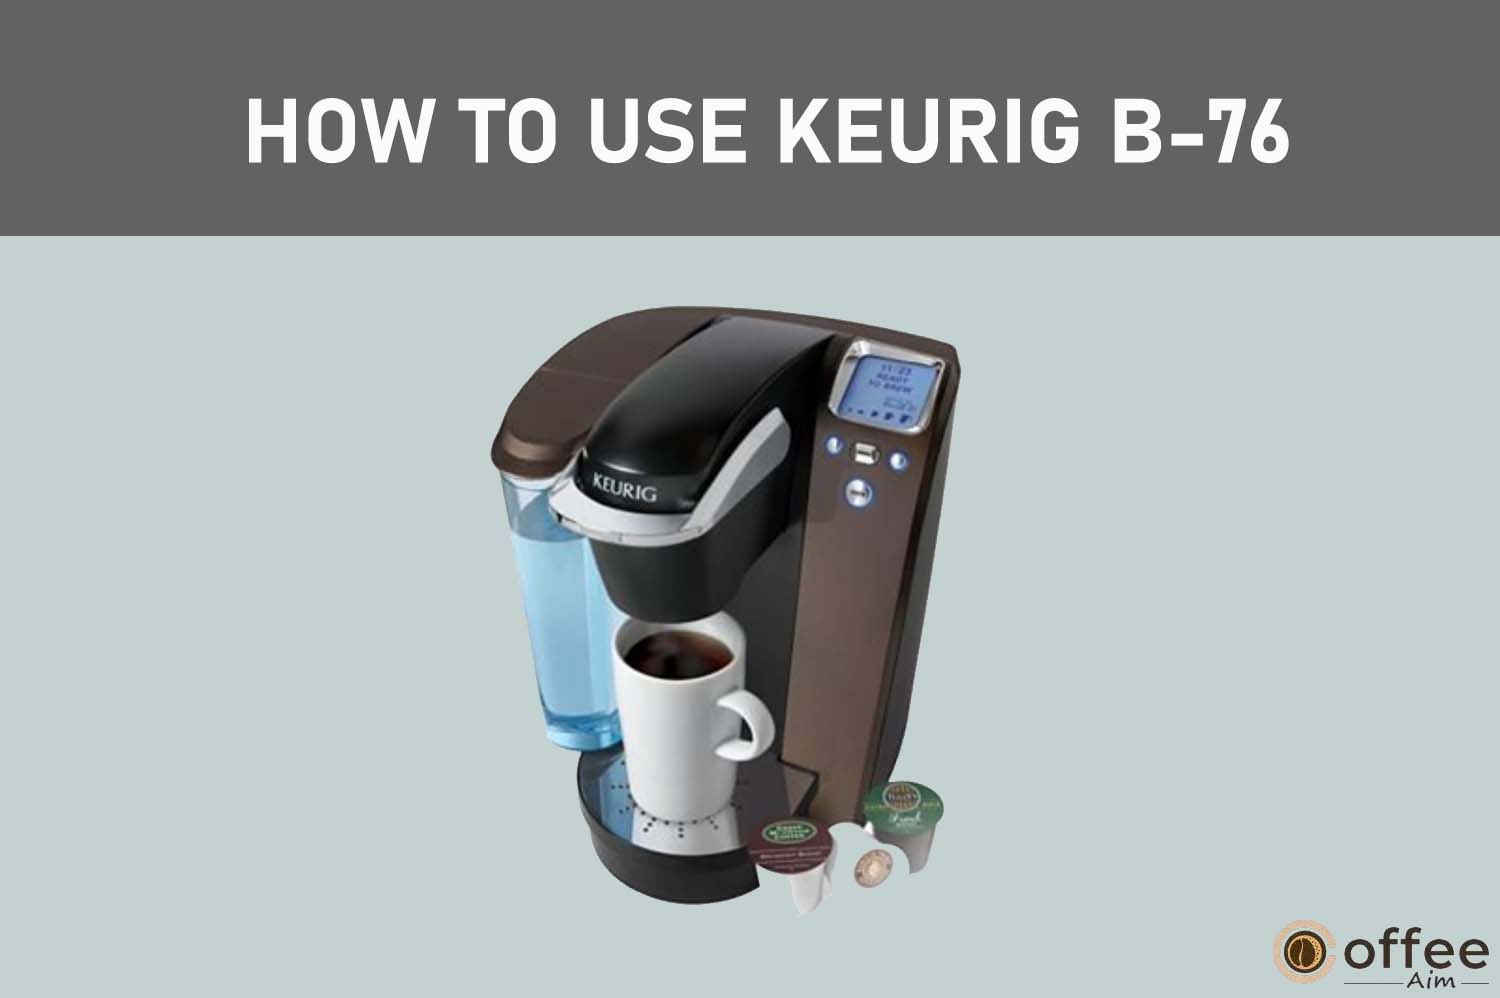 feature image fir the article "How To Use Keurig B-76"